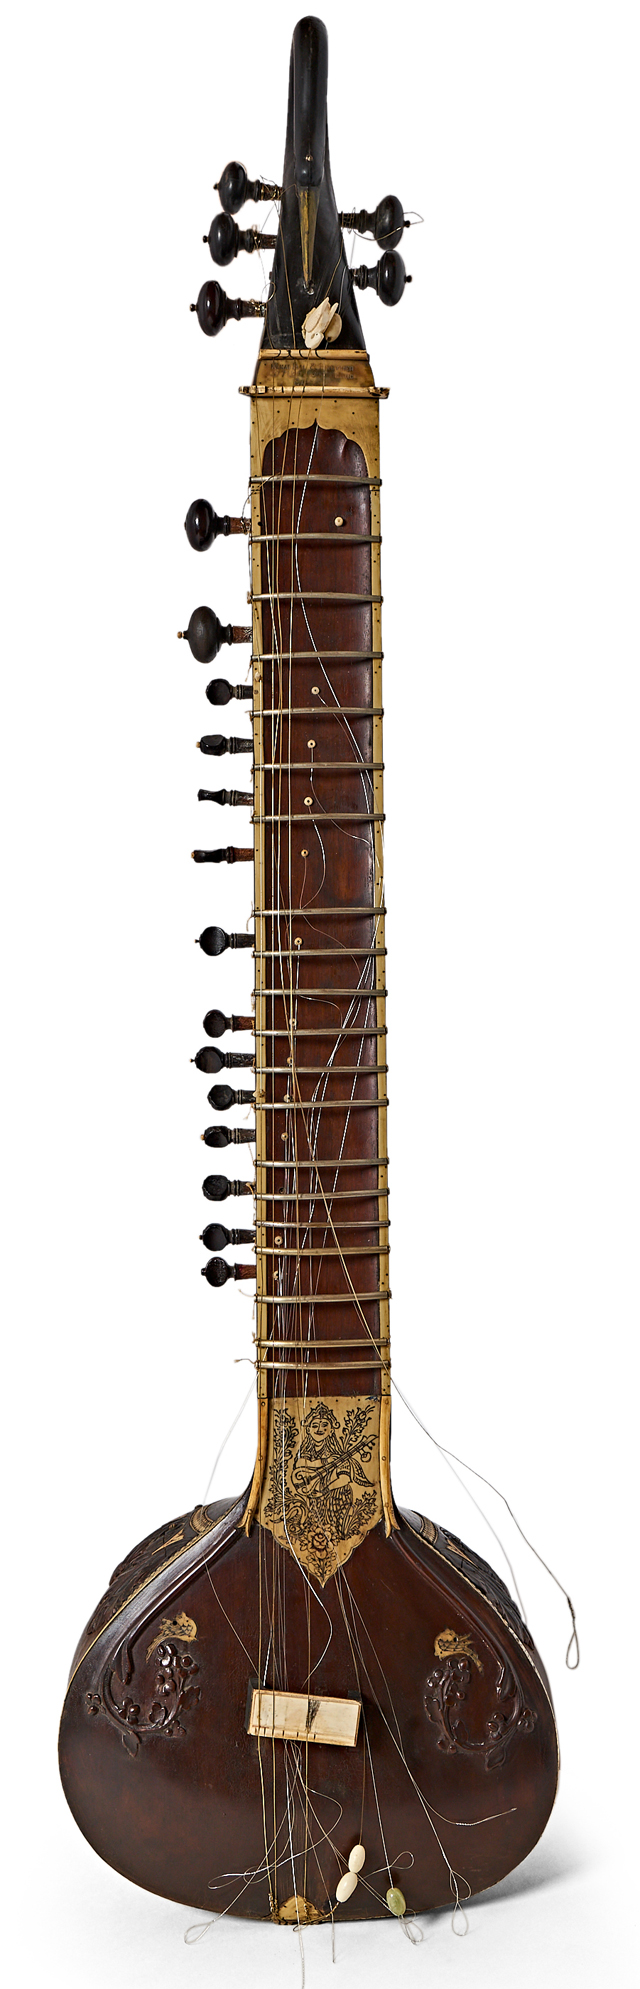 George Harrison's Sitar From 1965, When The Beatles Recorded ''Norwegian Wood''